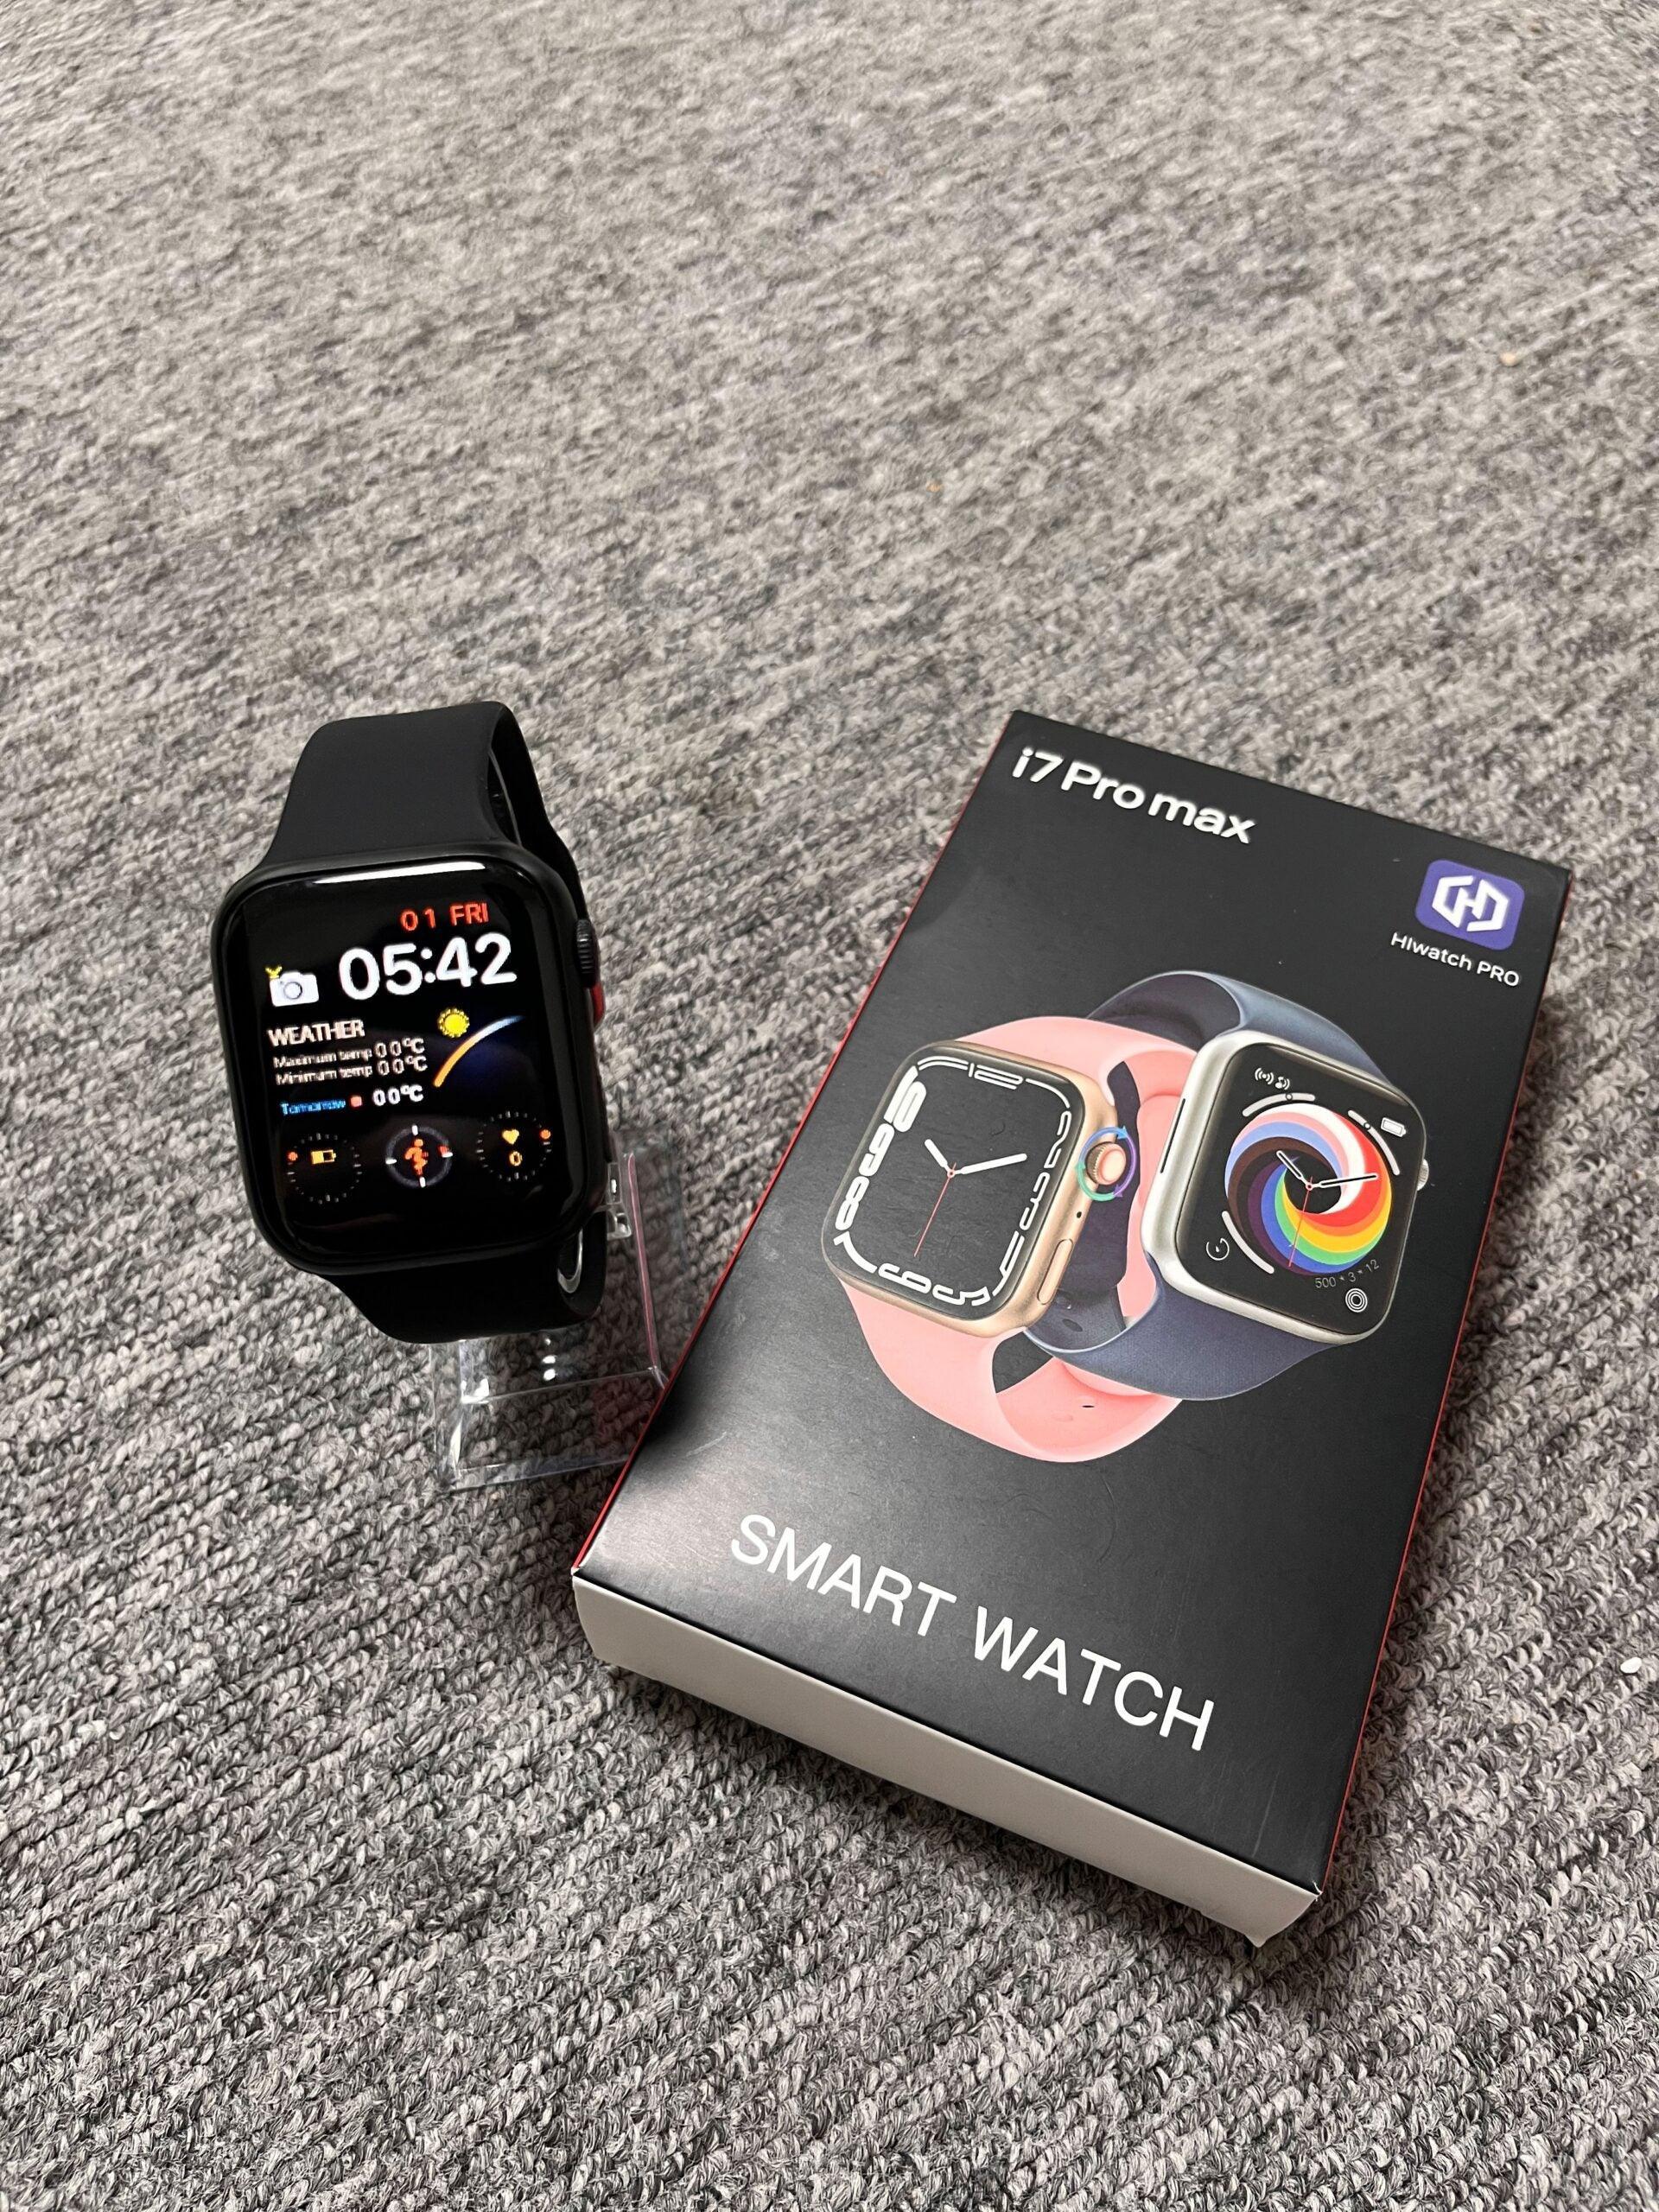 Smart Watch I7 Pro Max | Smart watches 2022 The Cheapest Apple Watch 7 Clone